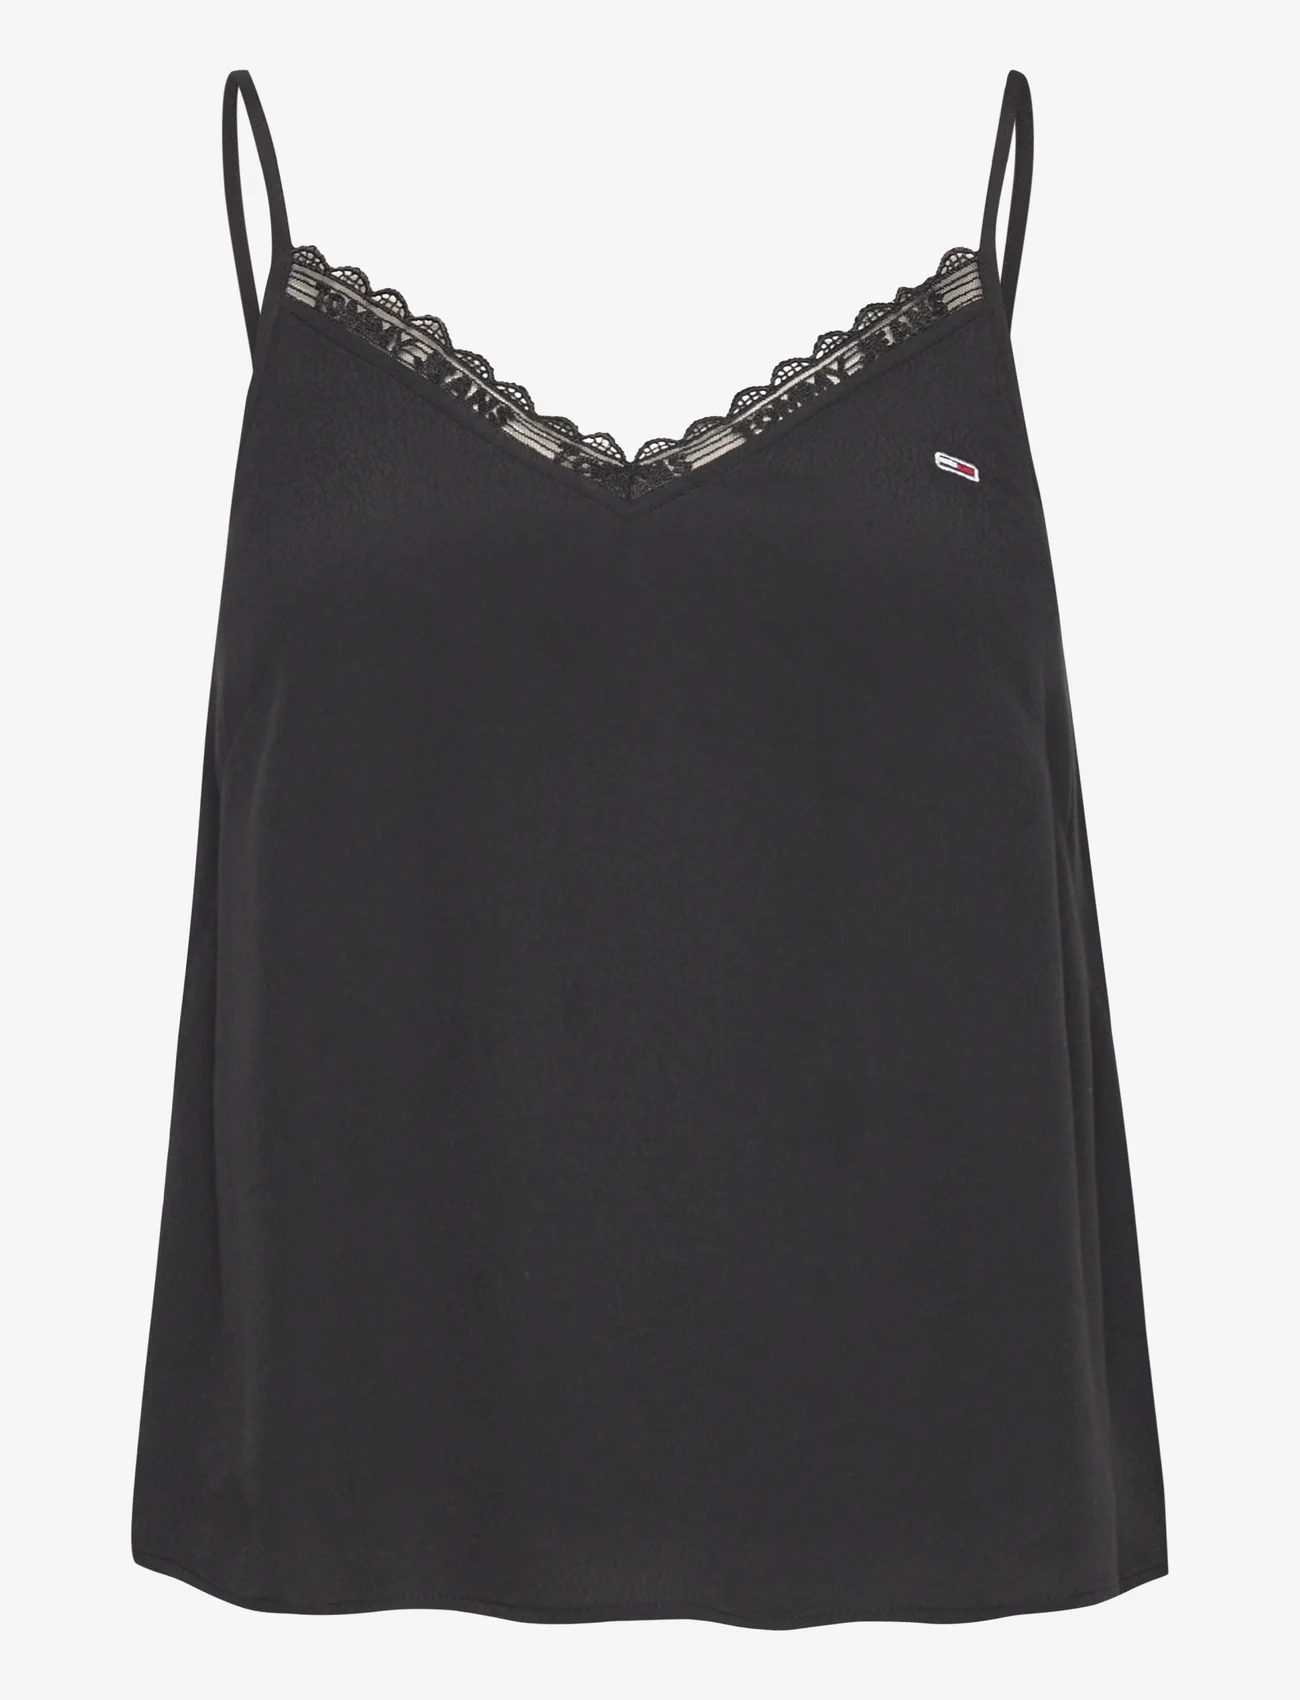 Tommy Jeans - TJW ESSENTIAL LACE STRAPPY TOP - Ærmeløse toppe - black - 0